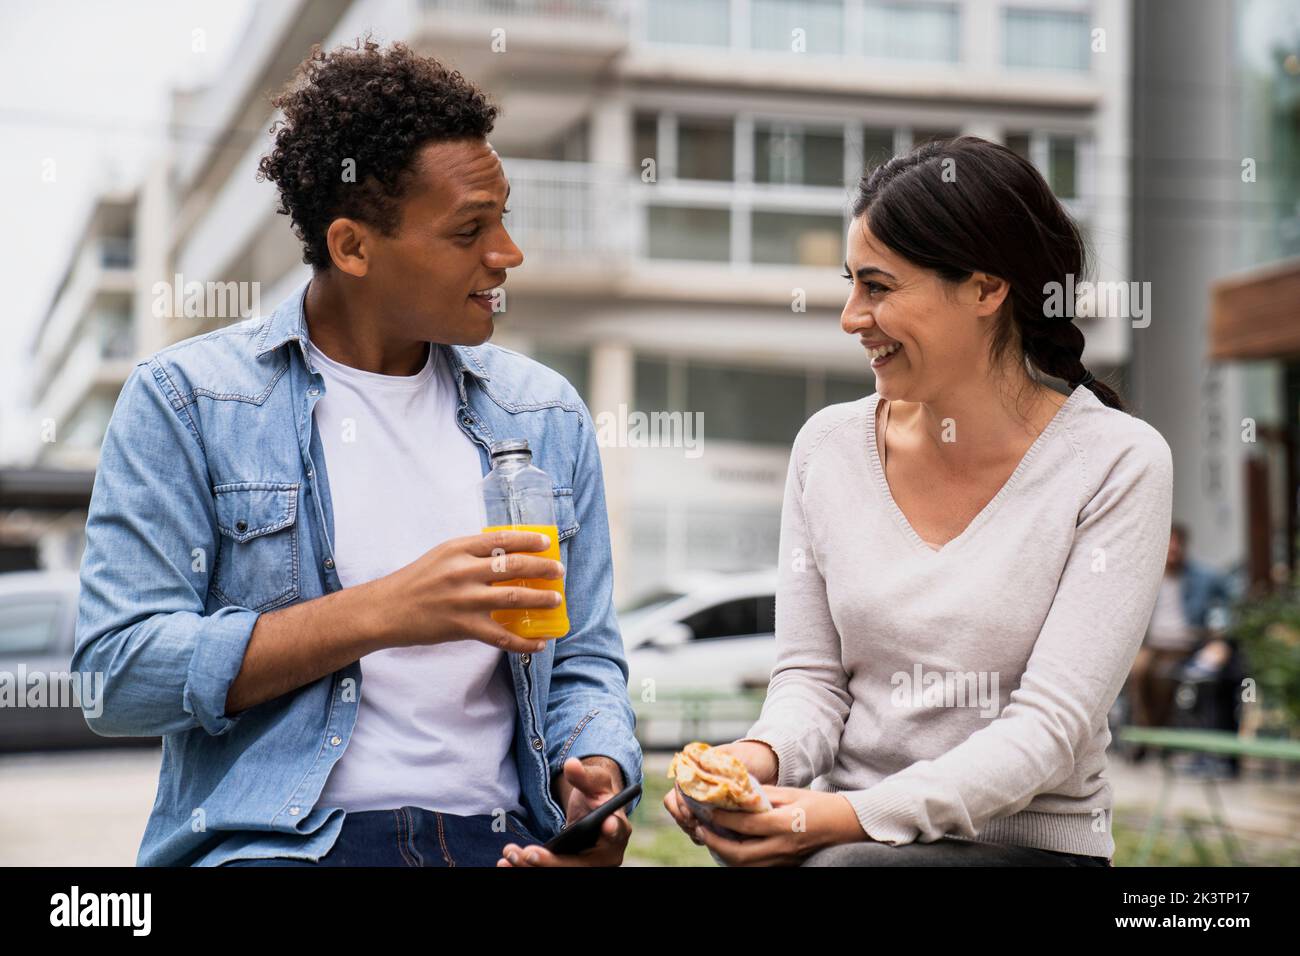 Young African-American man and Latin-American woman having a snack outdoors and enjoying themselves Stock Photo